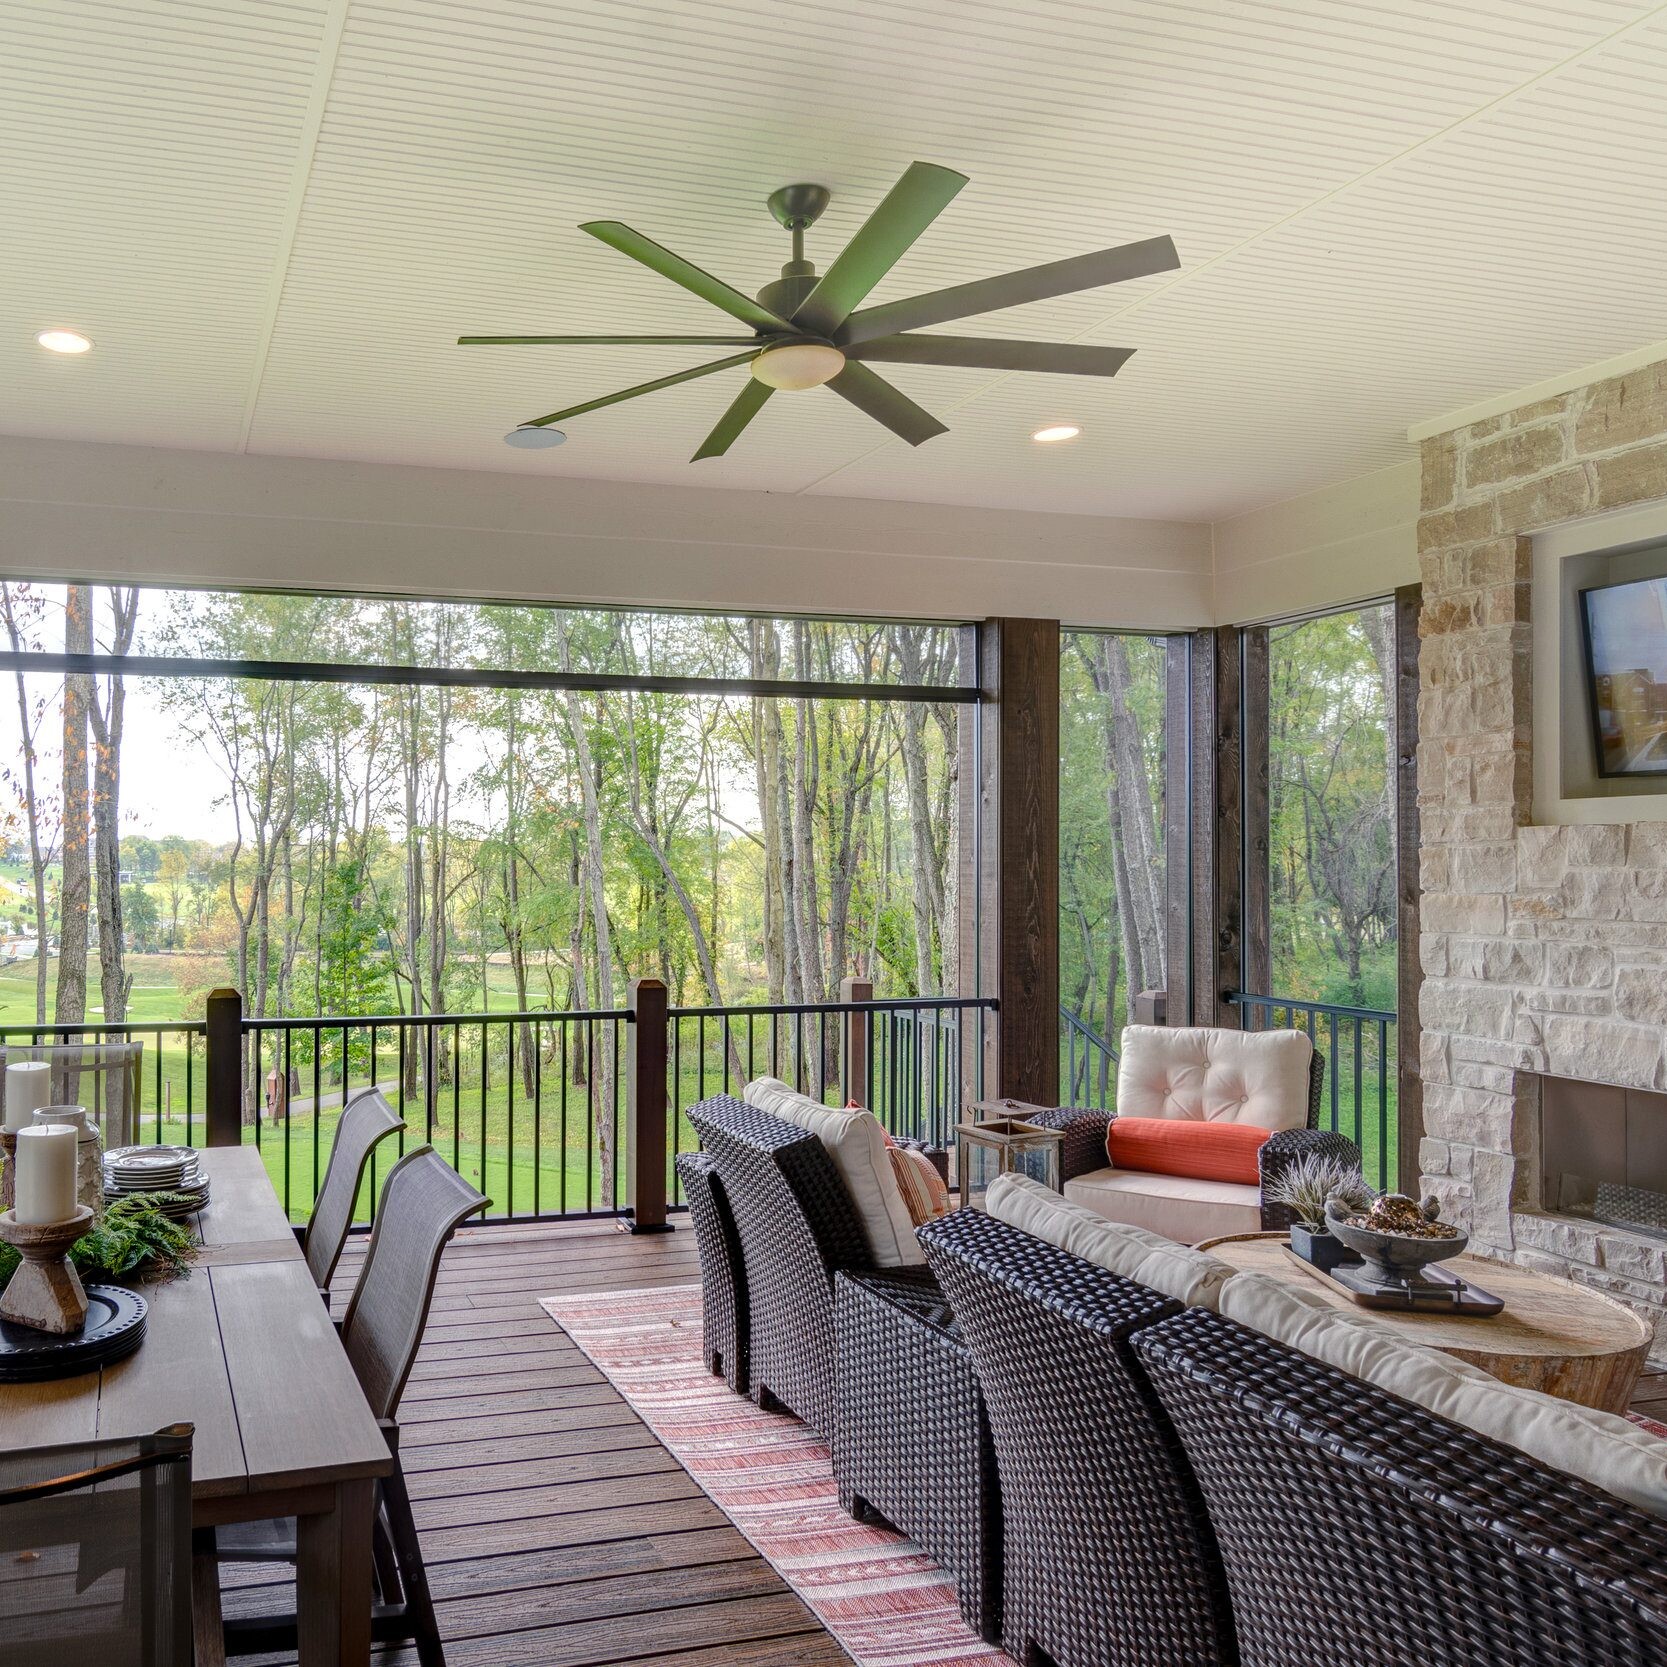 A covered patio with furniture and a ceiling fan, perfect for enjoying the outdoors in your custom home built by a reputable custom home builder in Carmel, Indiana.